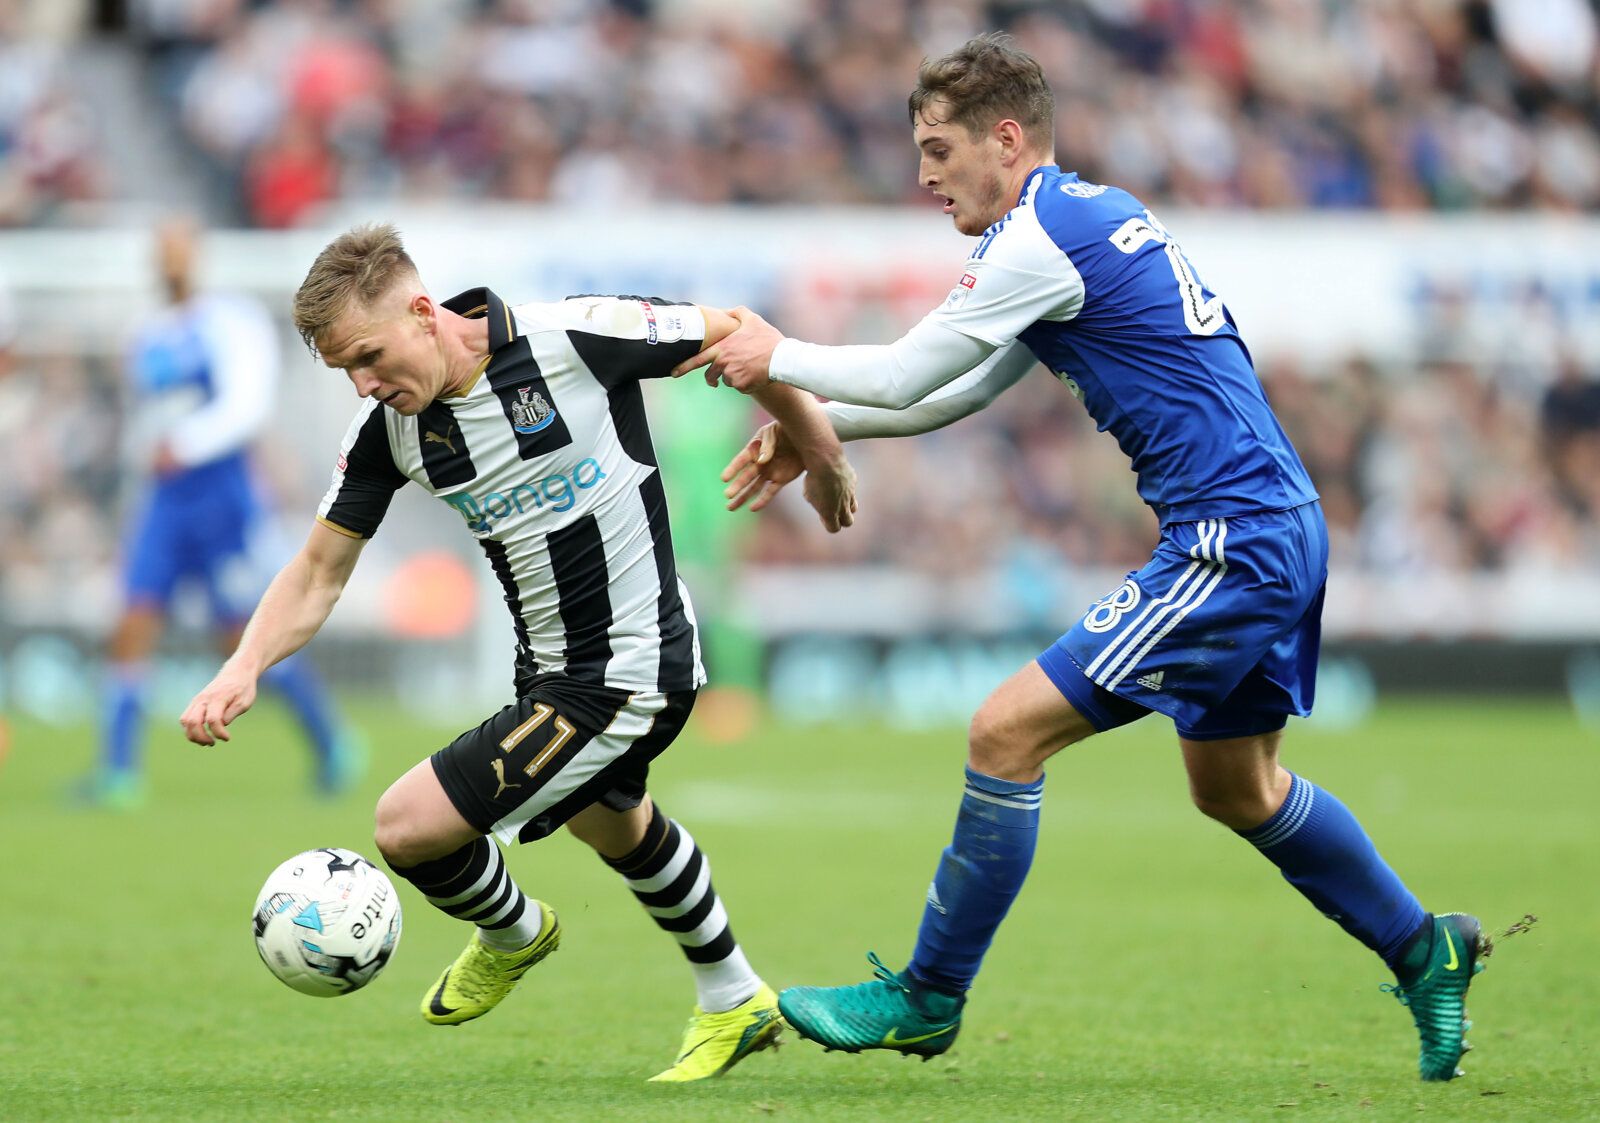 Britain Soccer Football - Newcastle United v Ipswich Town - Sky Bet Championship - St James' Park - 22/10/16
Matt Ritchie of Newcastle United in action with Conor Grant of Ipswich Town
Mandatory Credit: Action Images / John Clifton
Livepic
EDITORIAL USE ONLY. No use with unauthorized audio, video, data, fixture lists, club/league logos or "live" services. Online in-match use limited to 45 images, no video emulation. No use in betting, games or single club/league/player publications.  Please cont